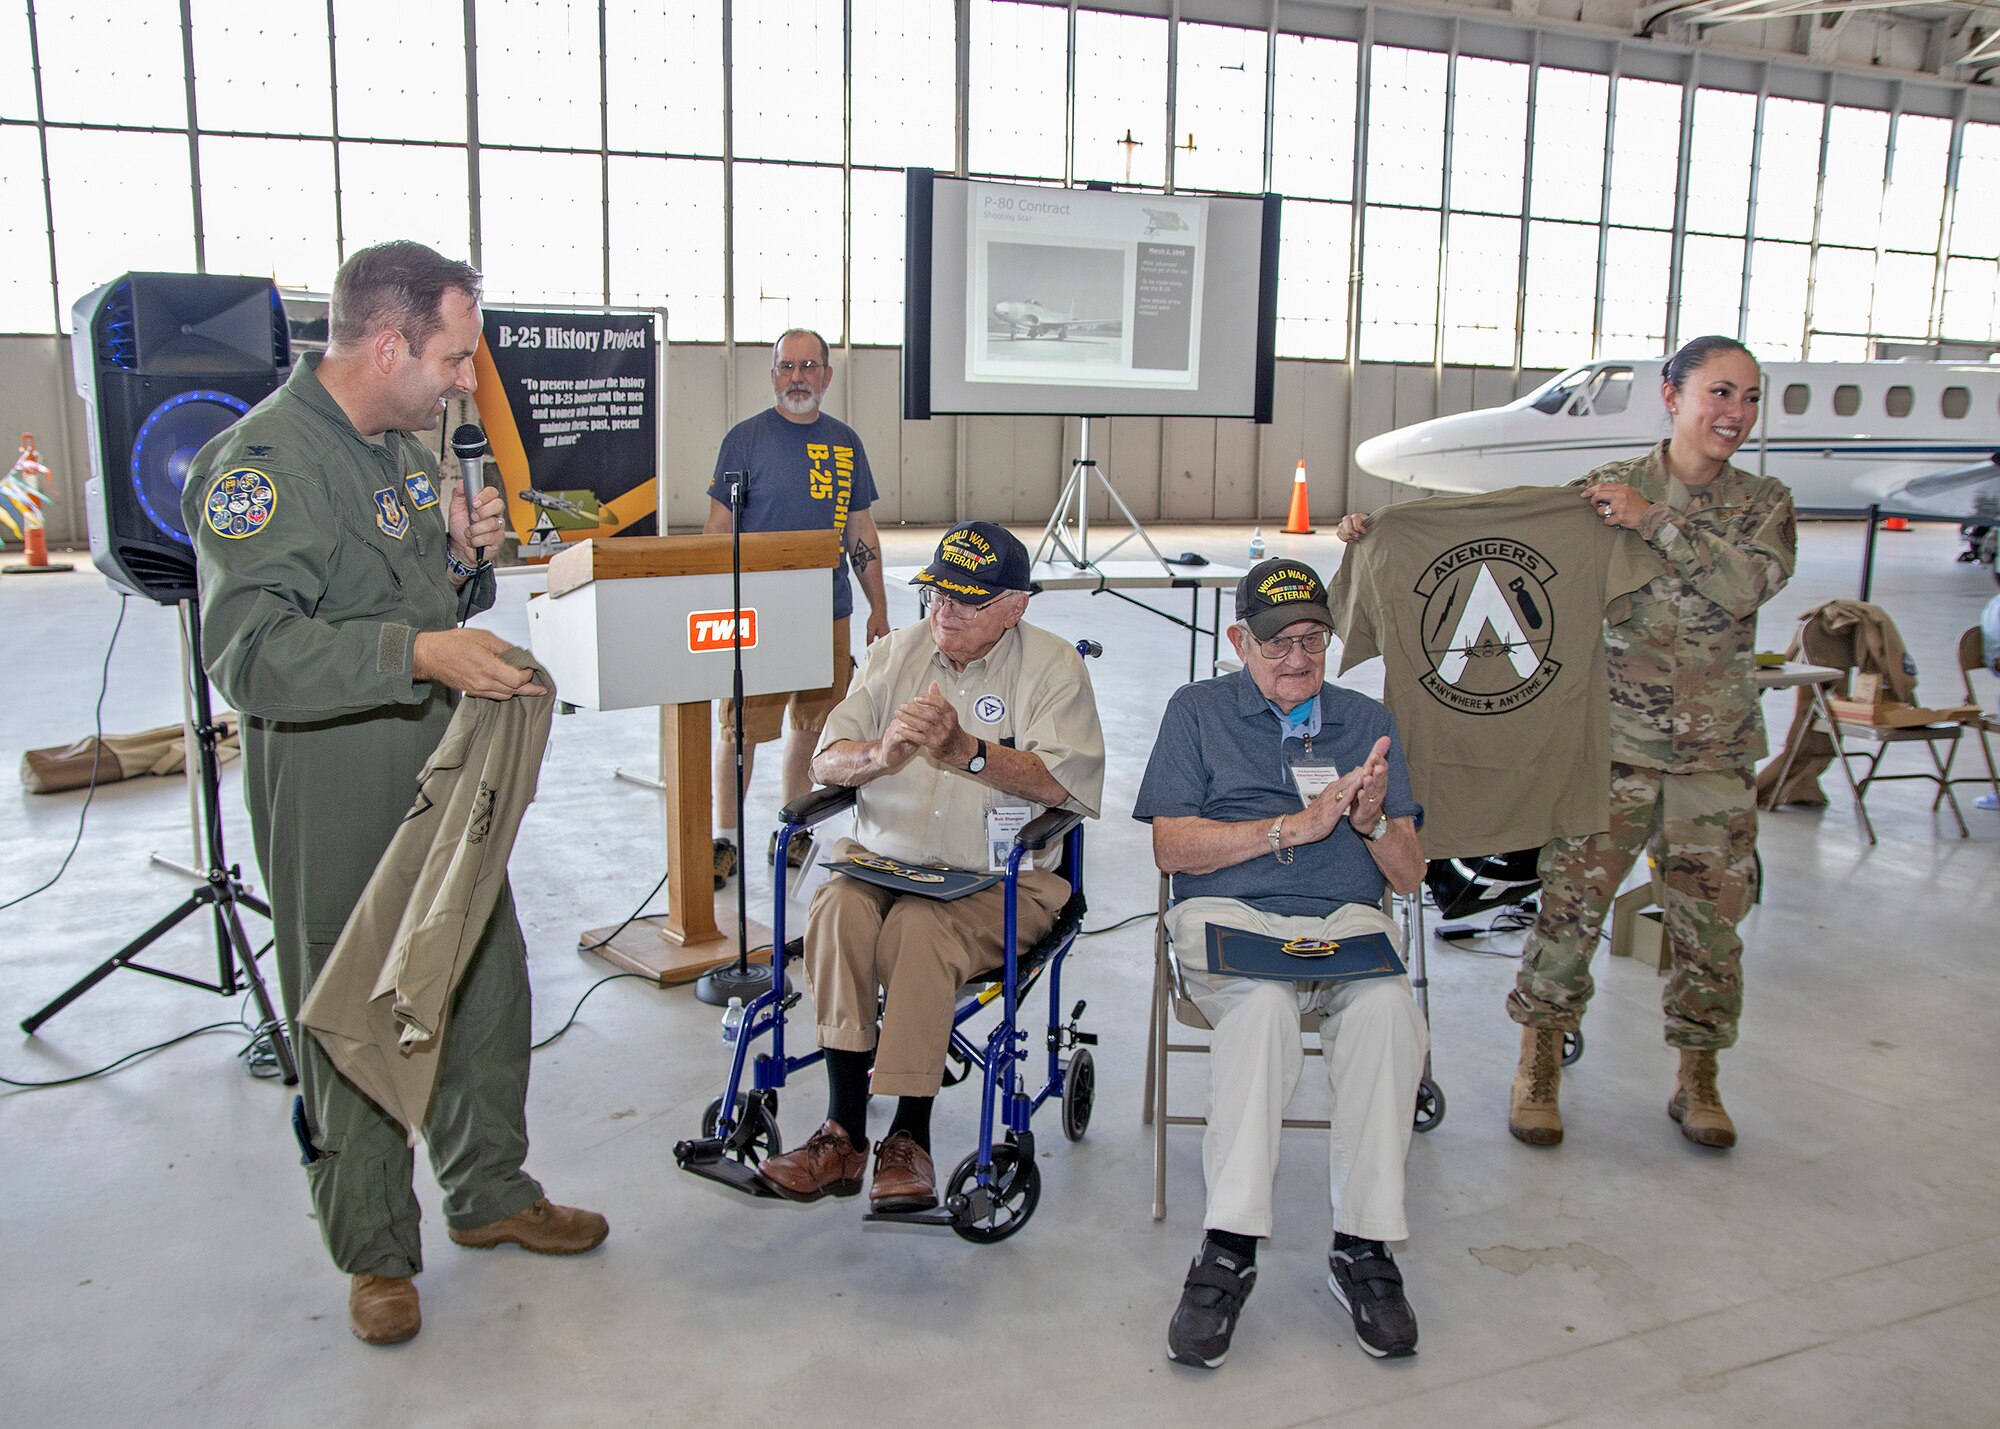 340th FTG, 39th FTS honor remaining 57th BW WWII vets